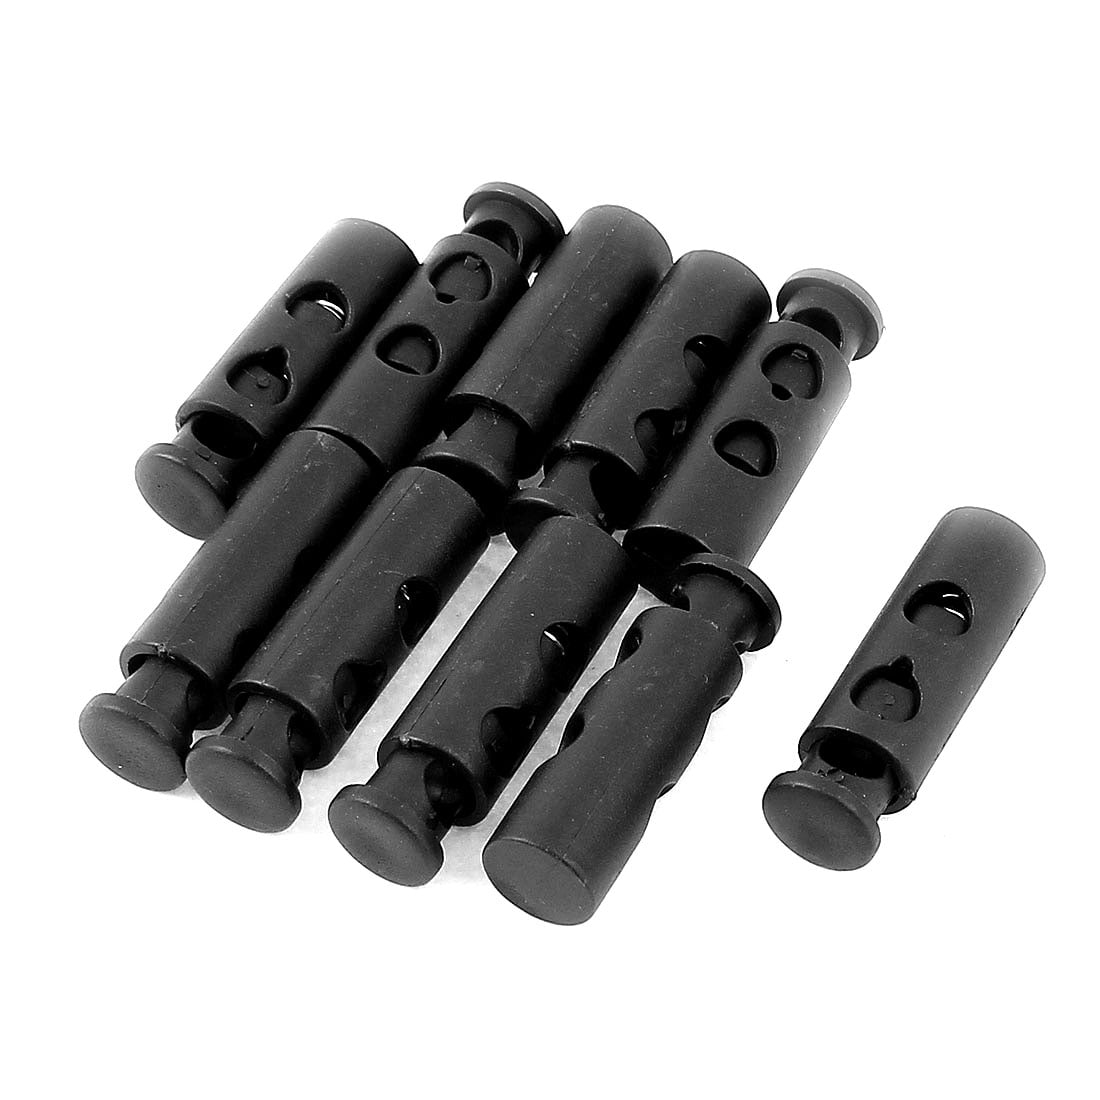 Black，6 PCS Metal Cord Locks iHYAO Double Hole Cord Lock End Spring Stop Toggle Stoppers 